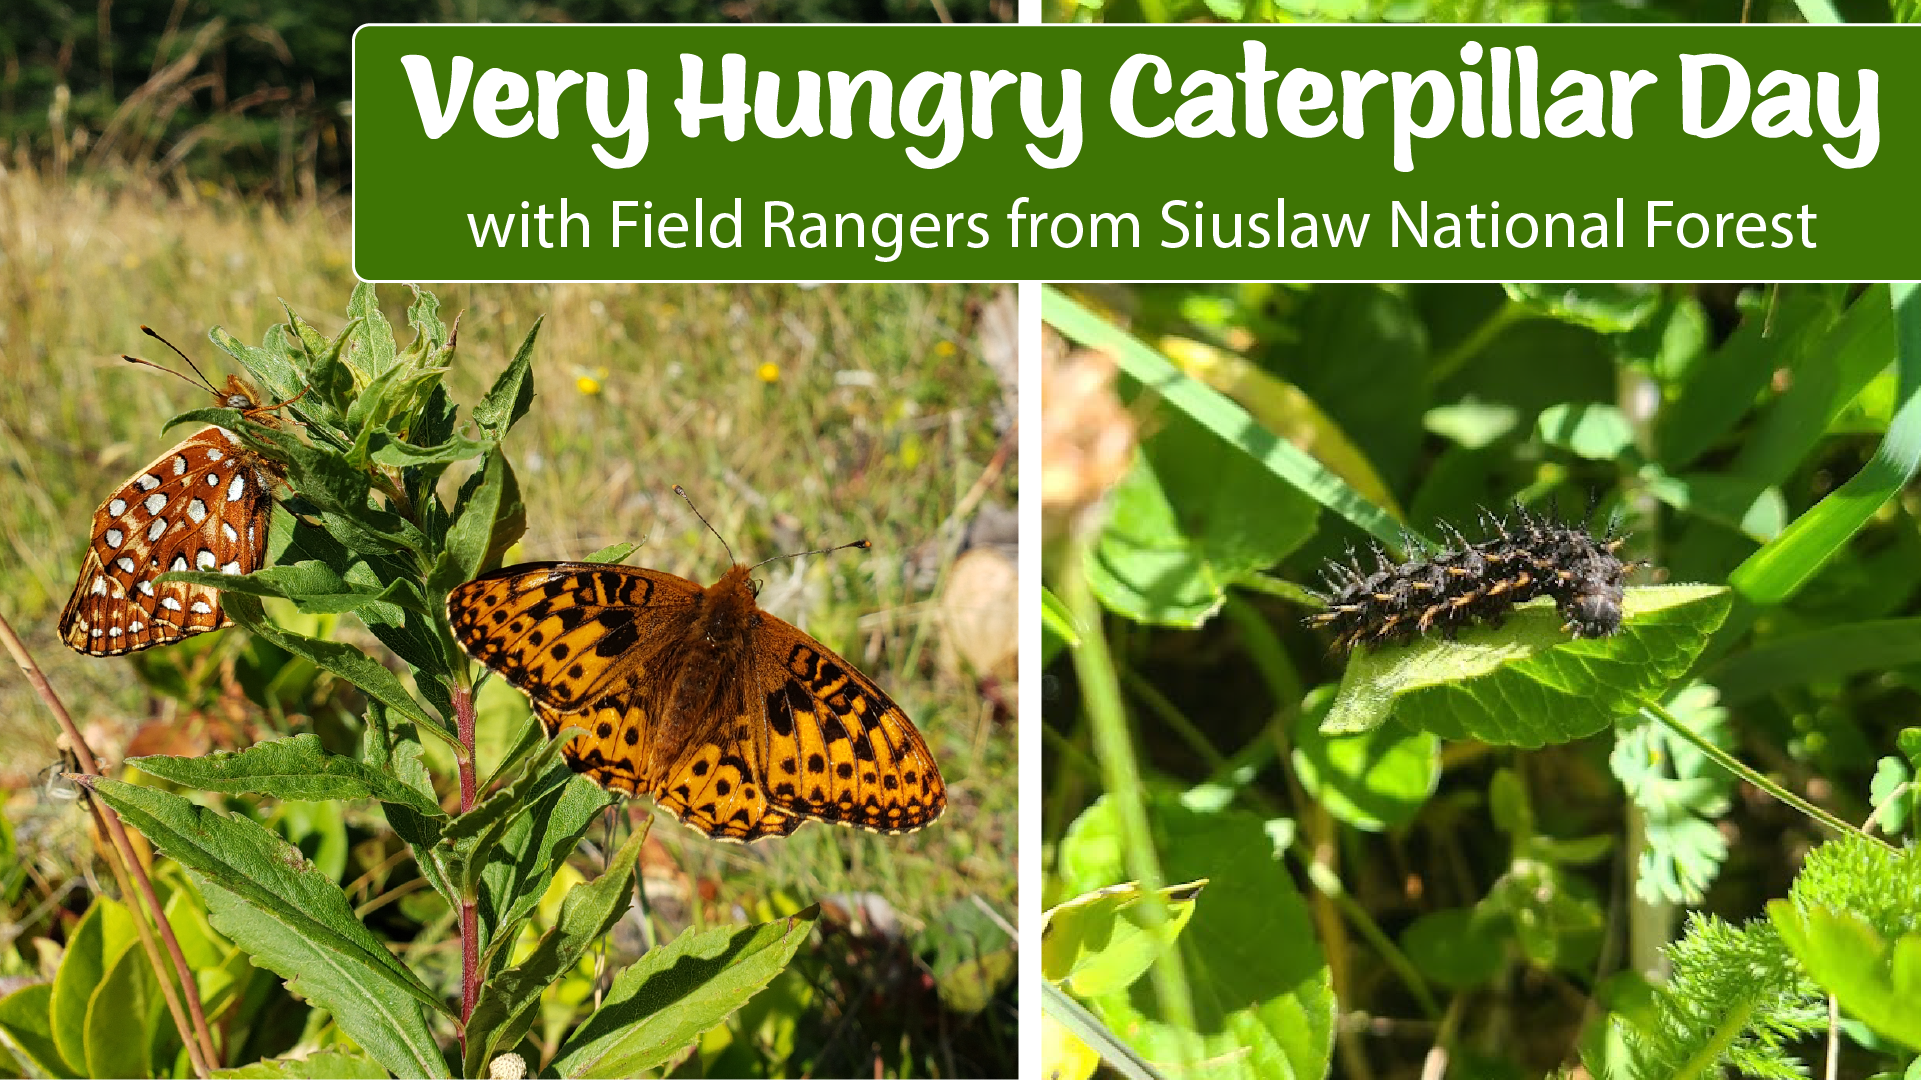 Very Hungry Caterpillar Day, with field rangers from Siuslaw National Forest